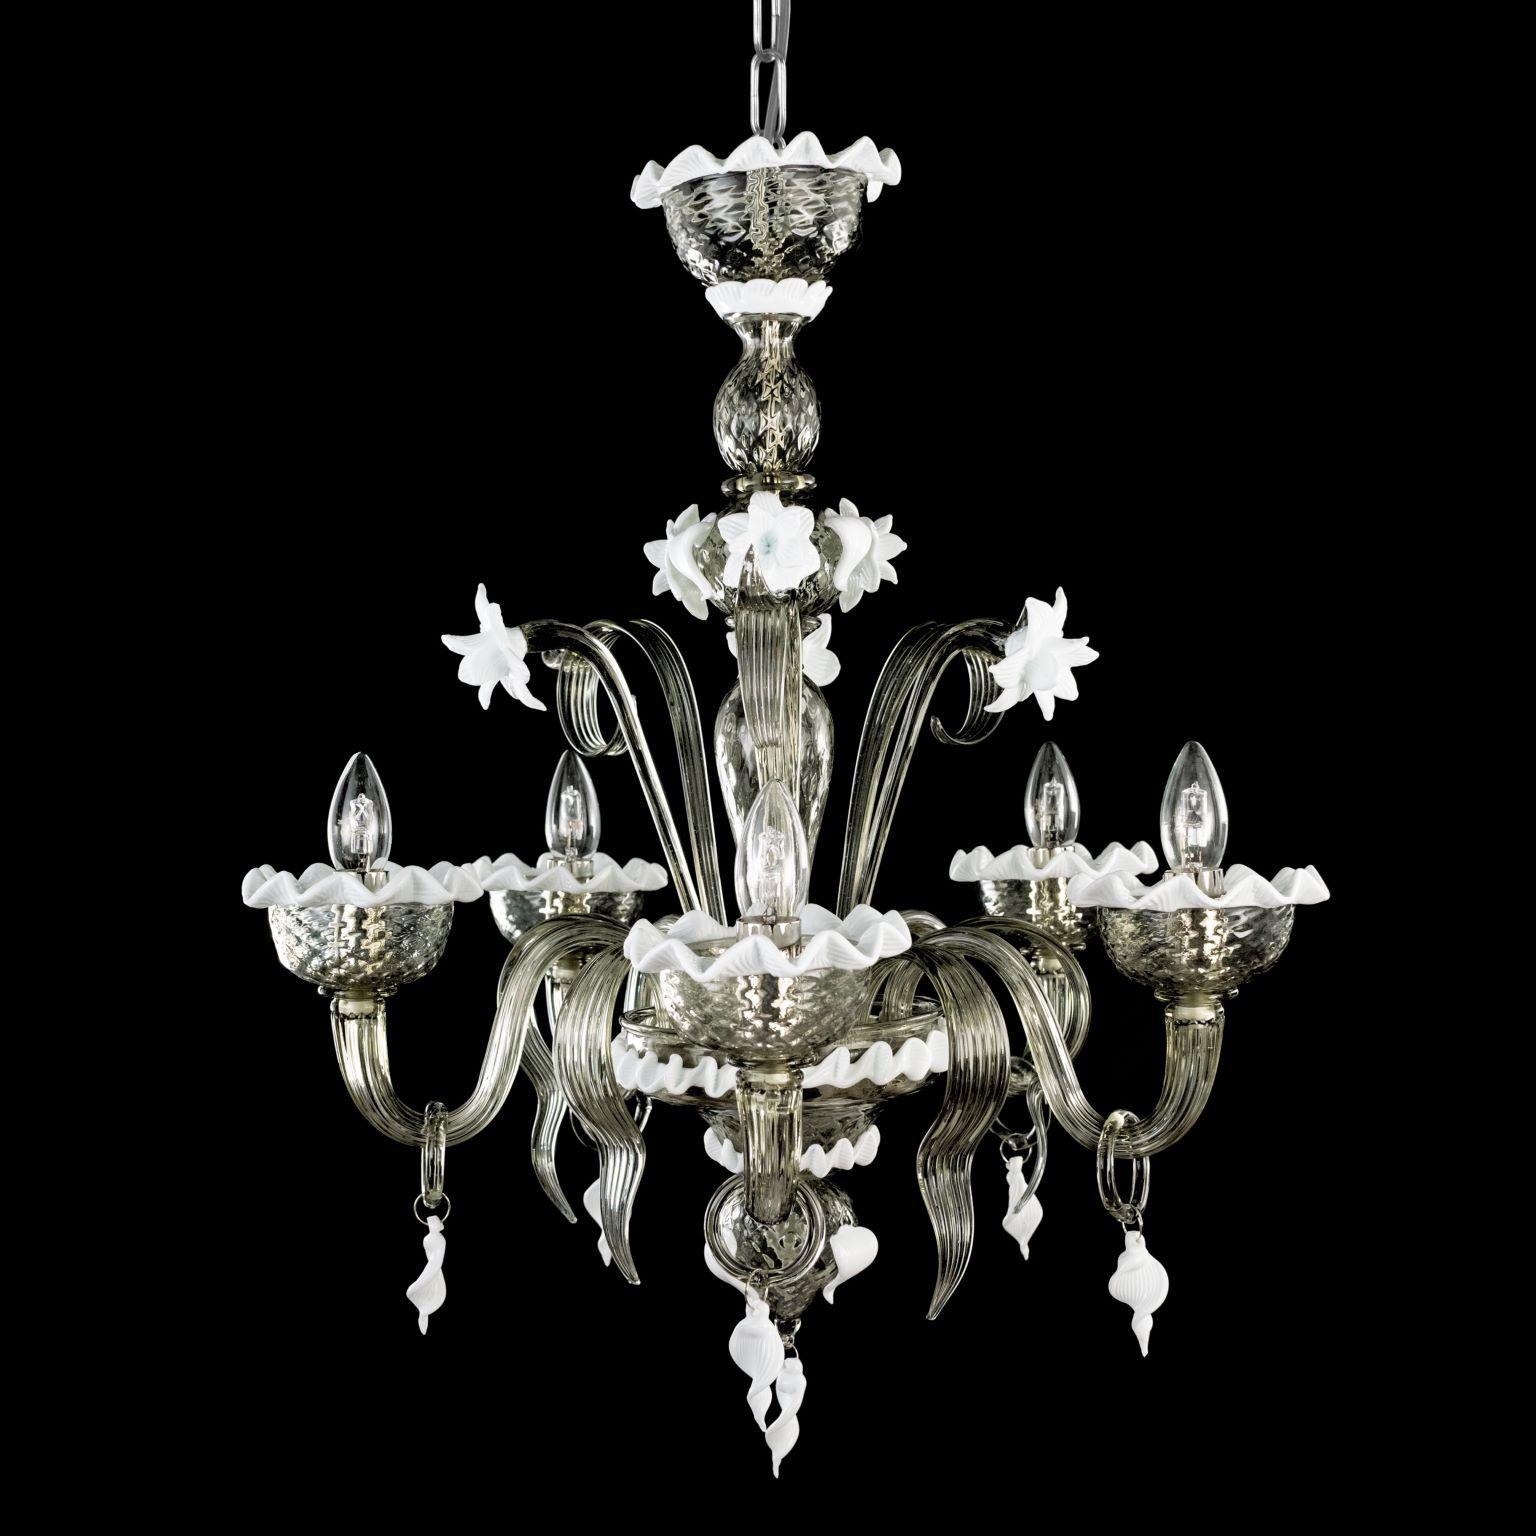 Artistic chandelier 5 arms in dark grey Murano glass and white details Springtime.
The peculiar characteristic of this lighting work is the richness of its decorations. 
Springtime reflects the authentic Murano glass tradition, which has become